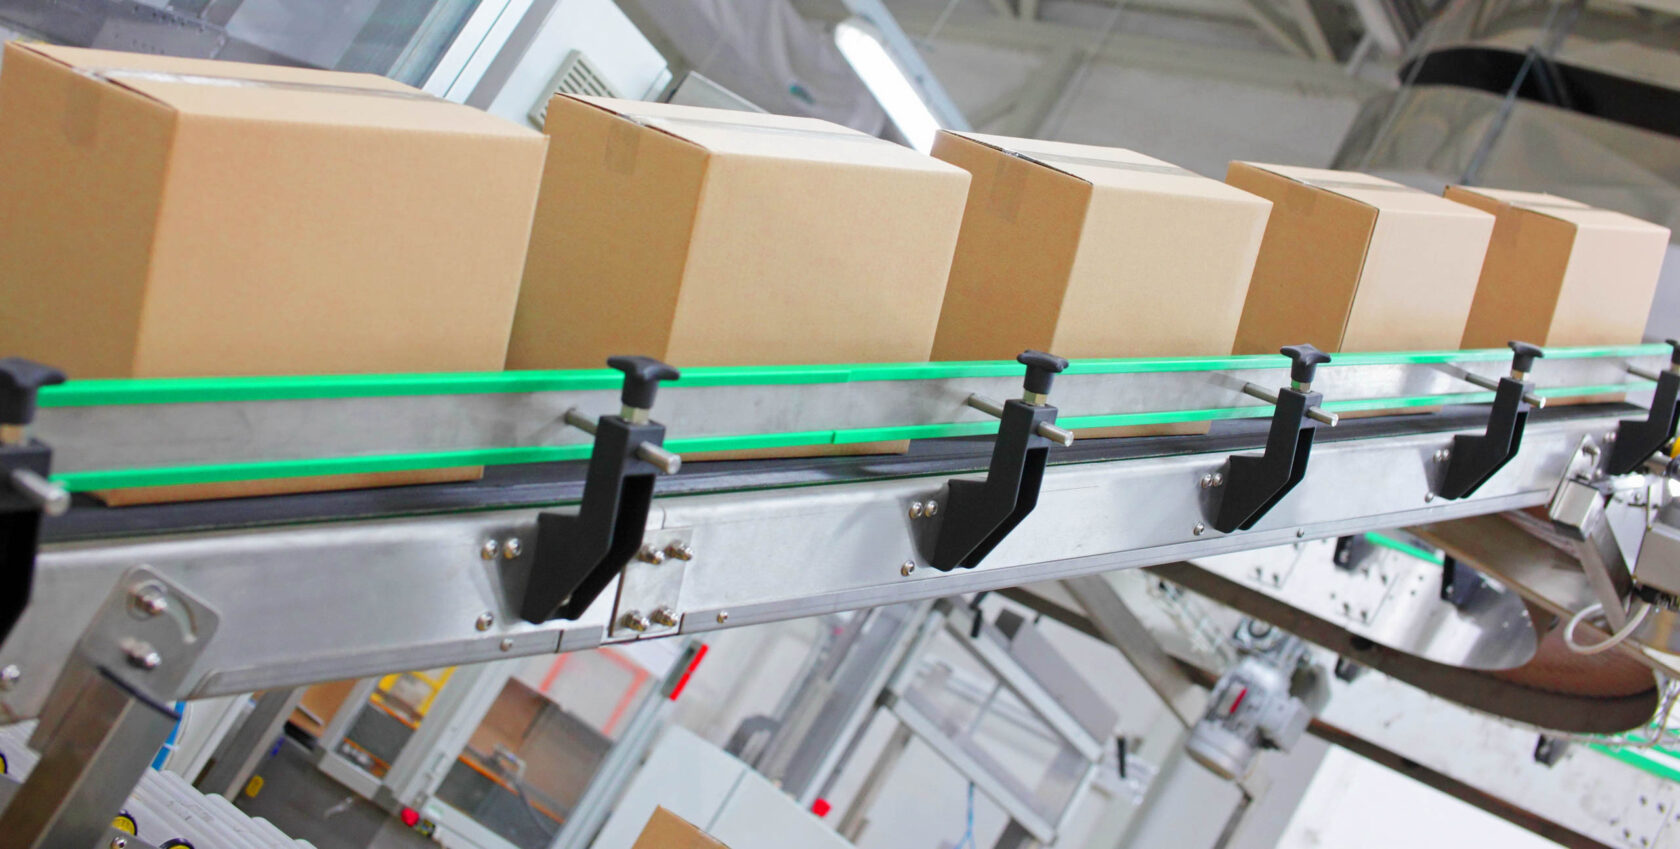 A conveyor belt with boxes on it.